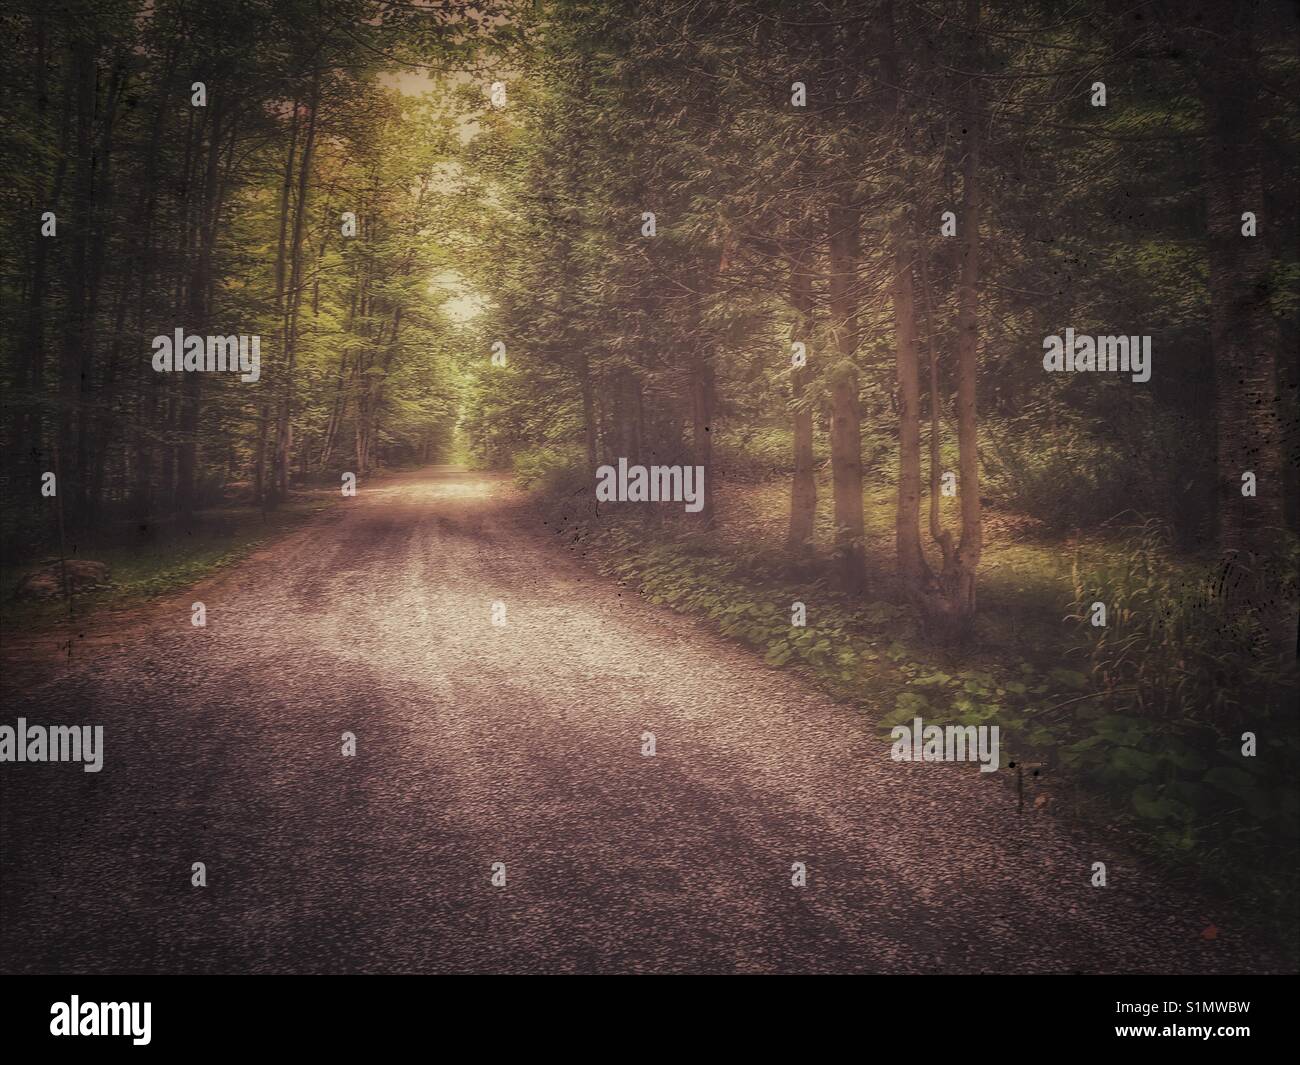 Road in the forest. Stock Photo